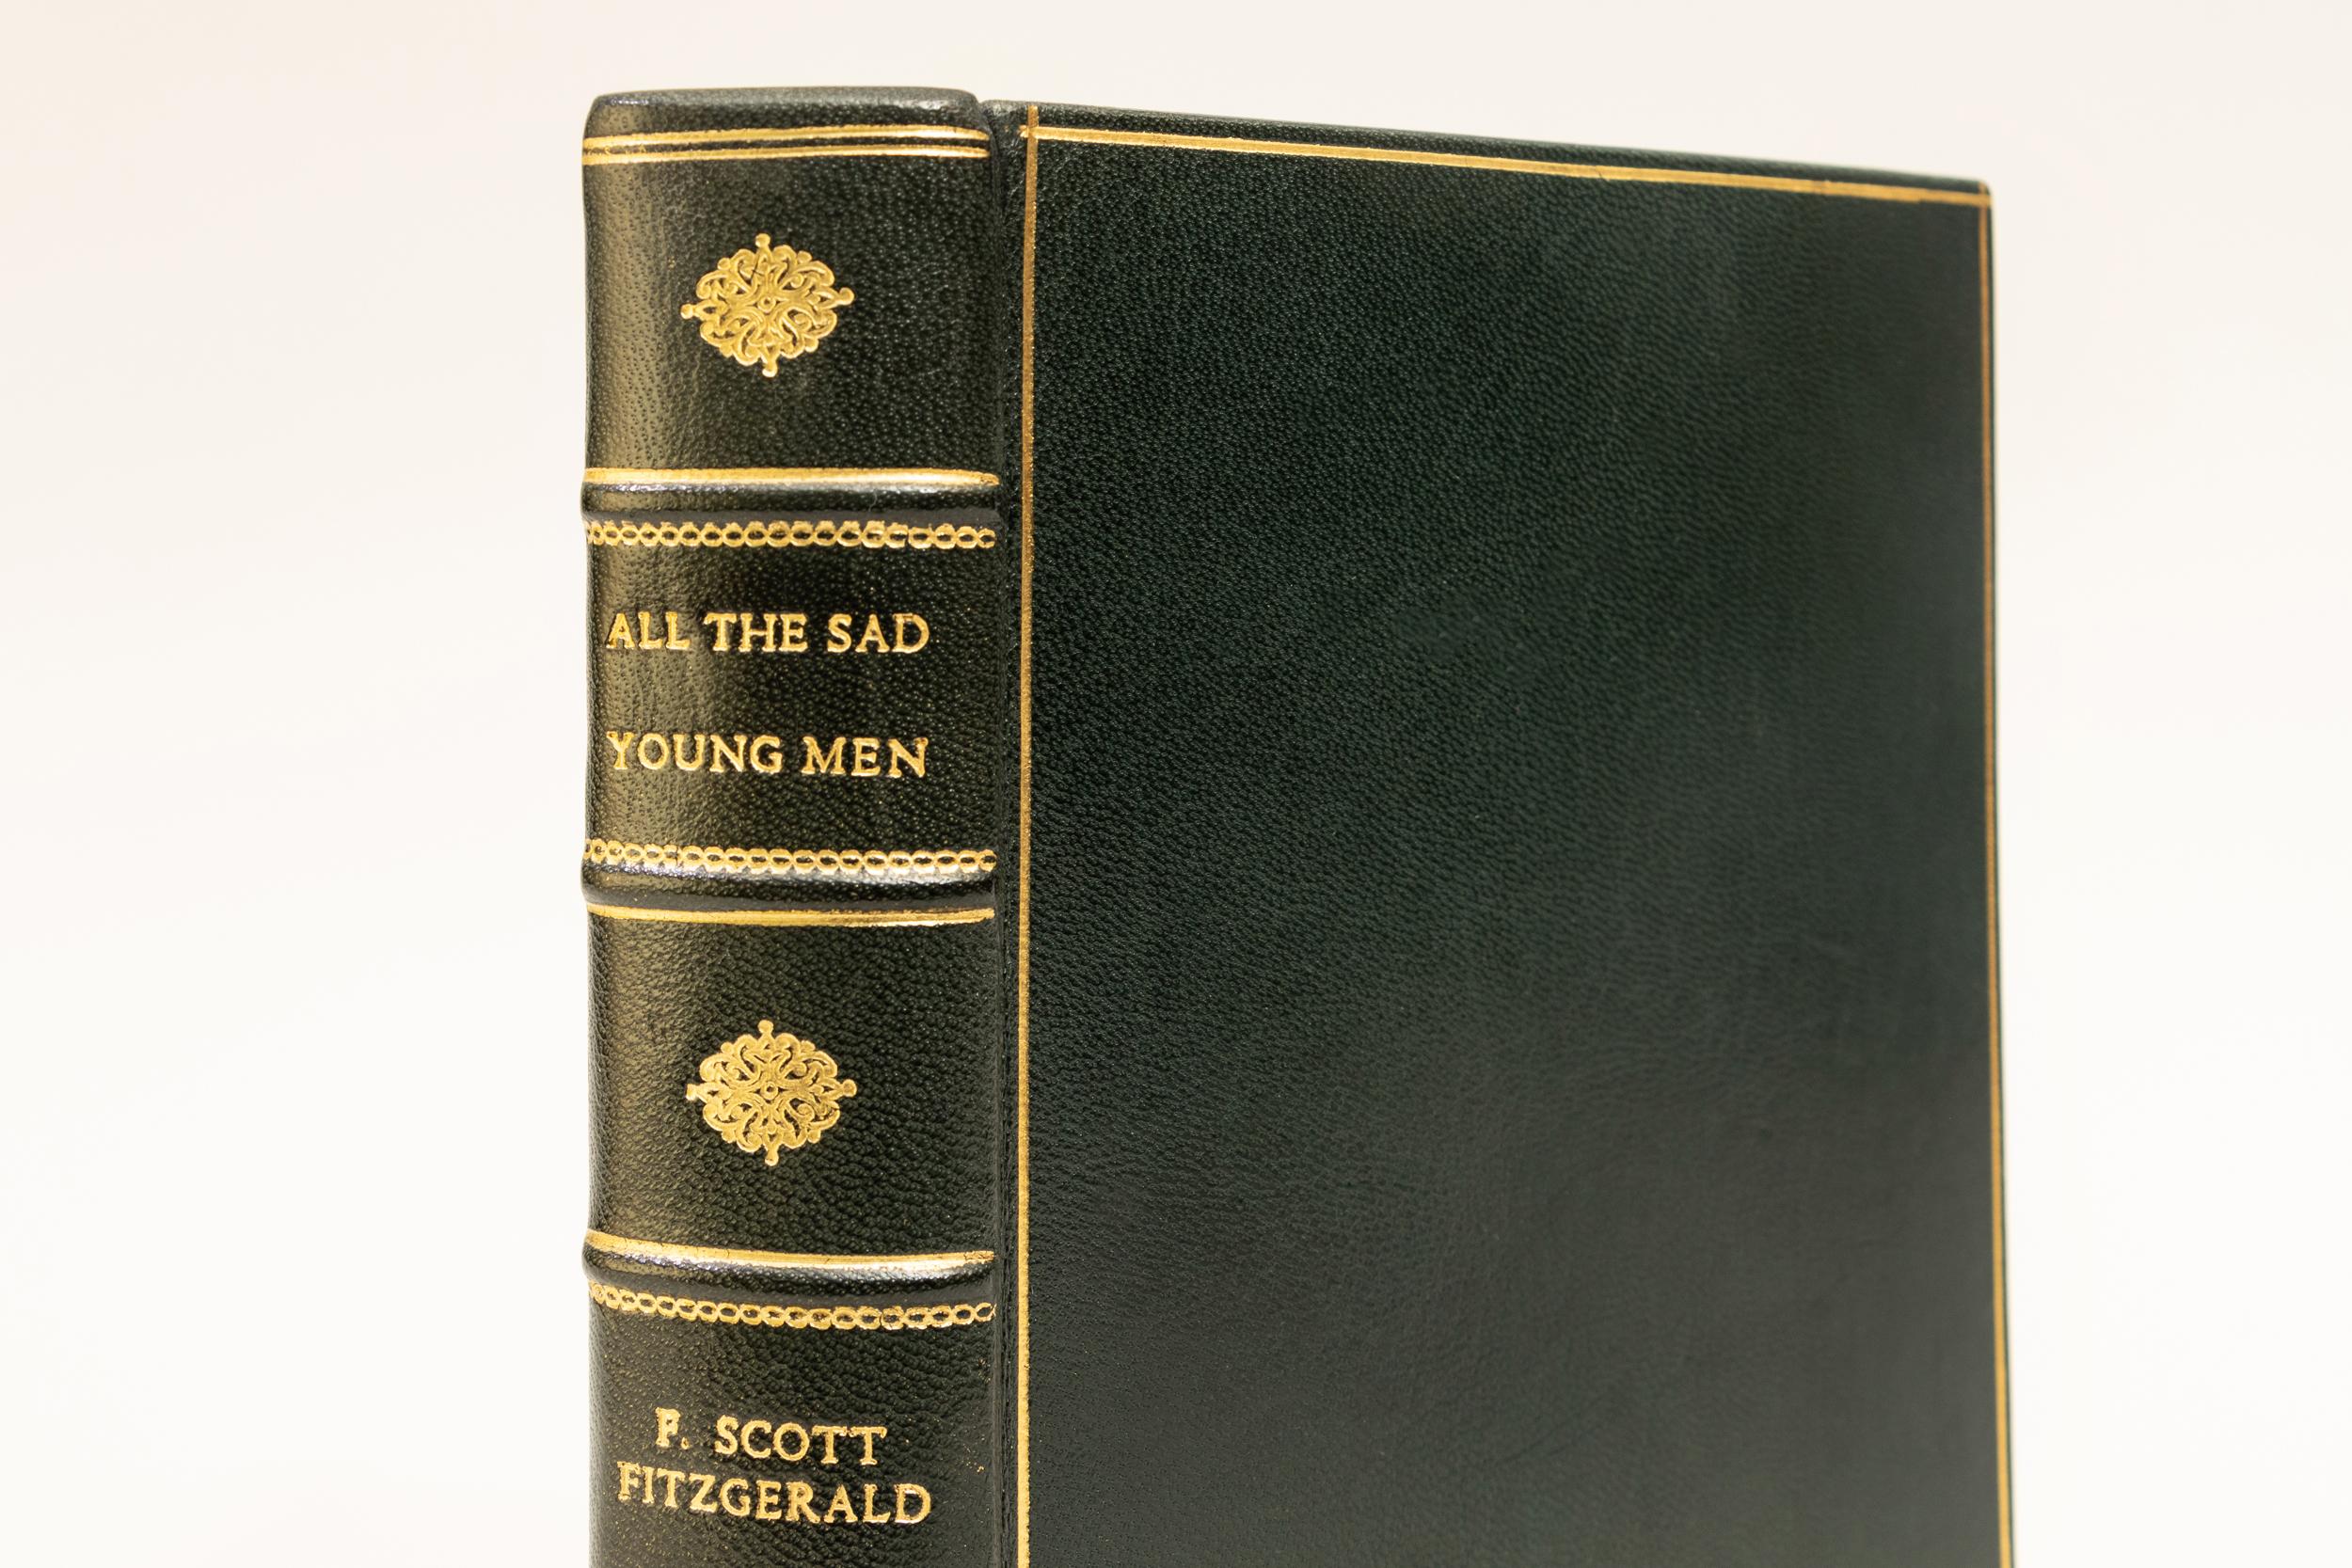 1 Volume. F. S. Fitzgerald. All The Sad Young Men. Rebound in full green morocco top edges gilt, raised bands, gilt panels. Published: New York: Charles
Scribner's Sons 1926 first edition.